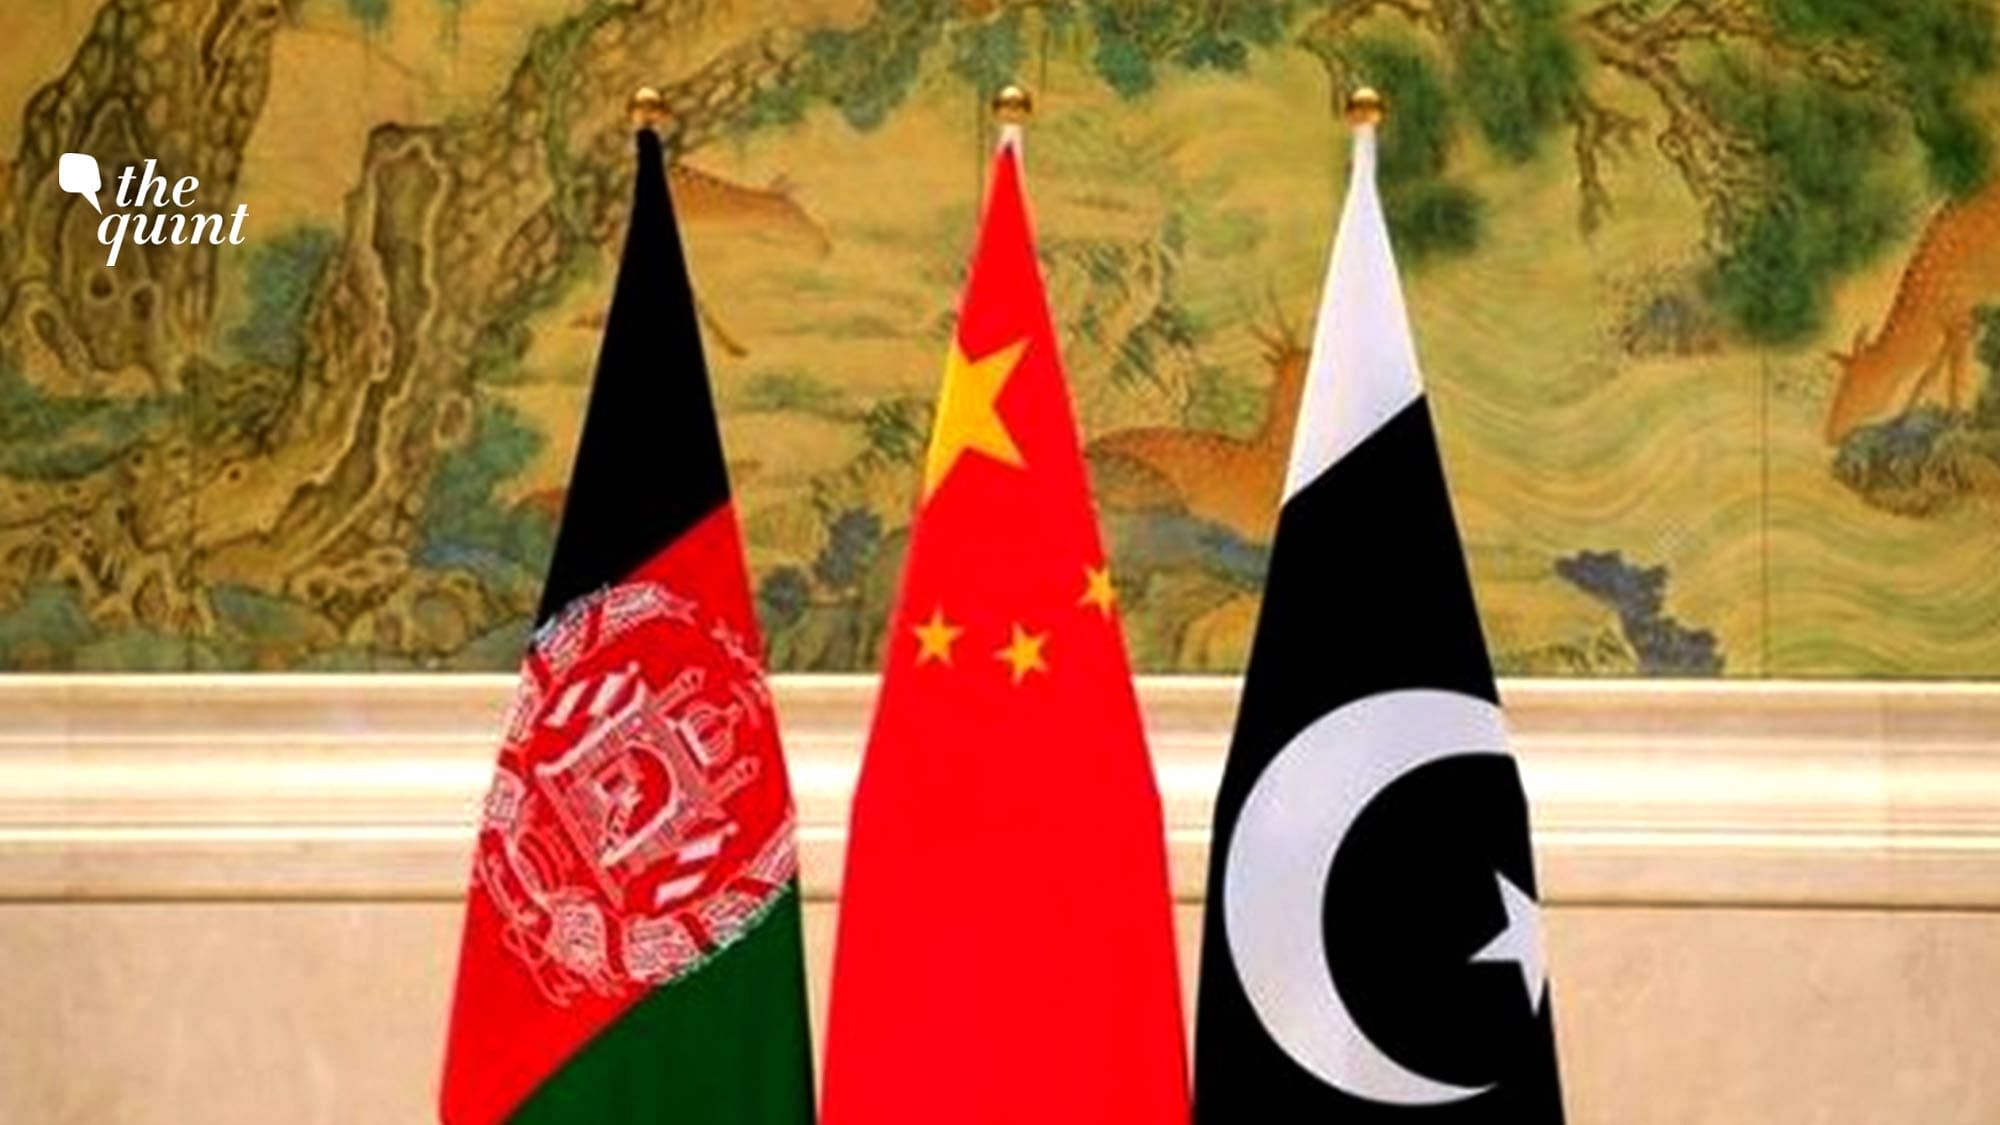 Image of flags of China (centre), Afghanistan (L) and Pakistan (R) used for representational purposes.